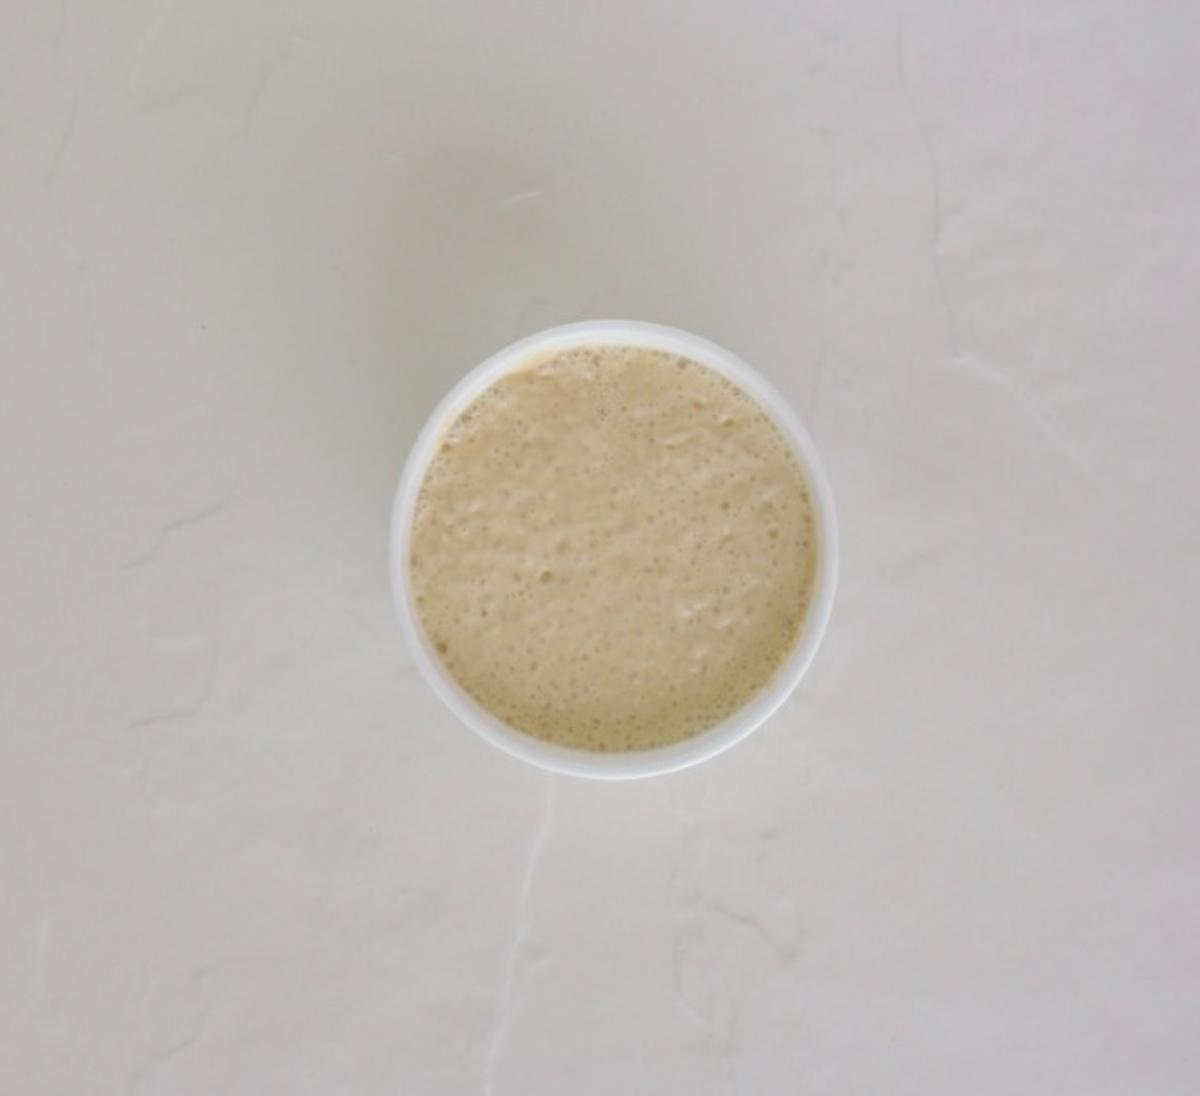 yeast for the naan in a bowl